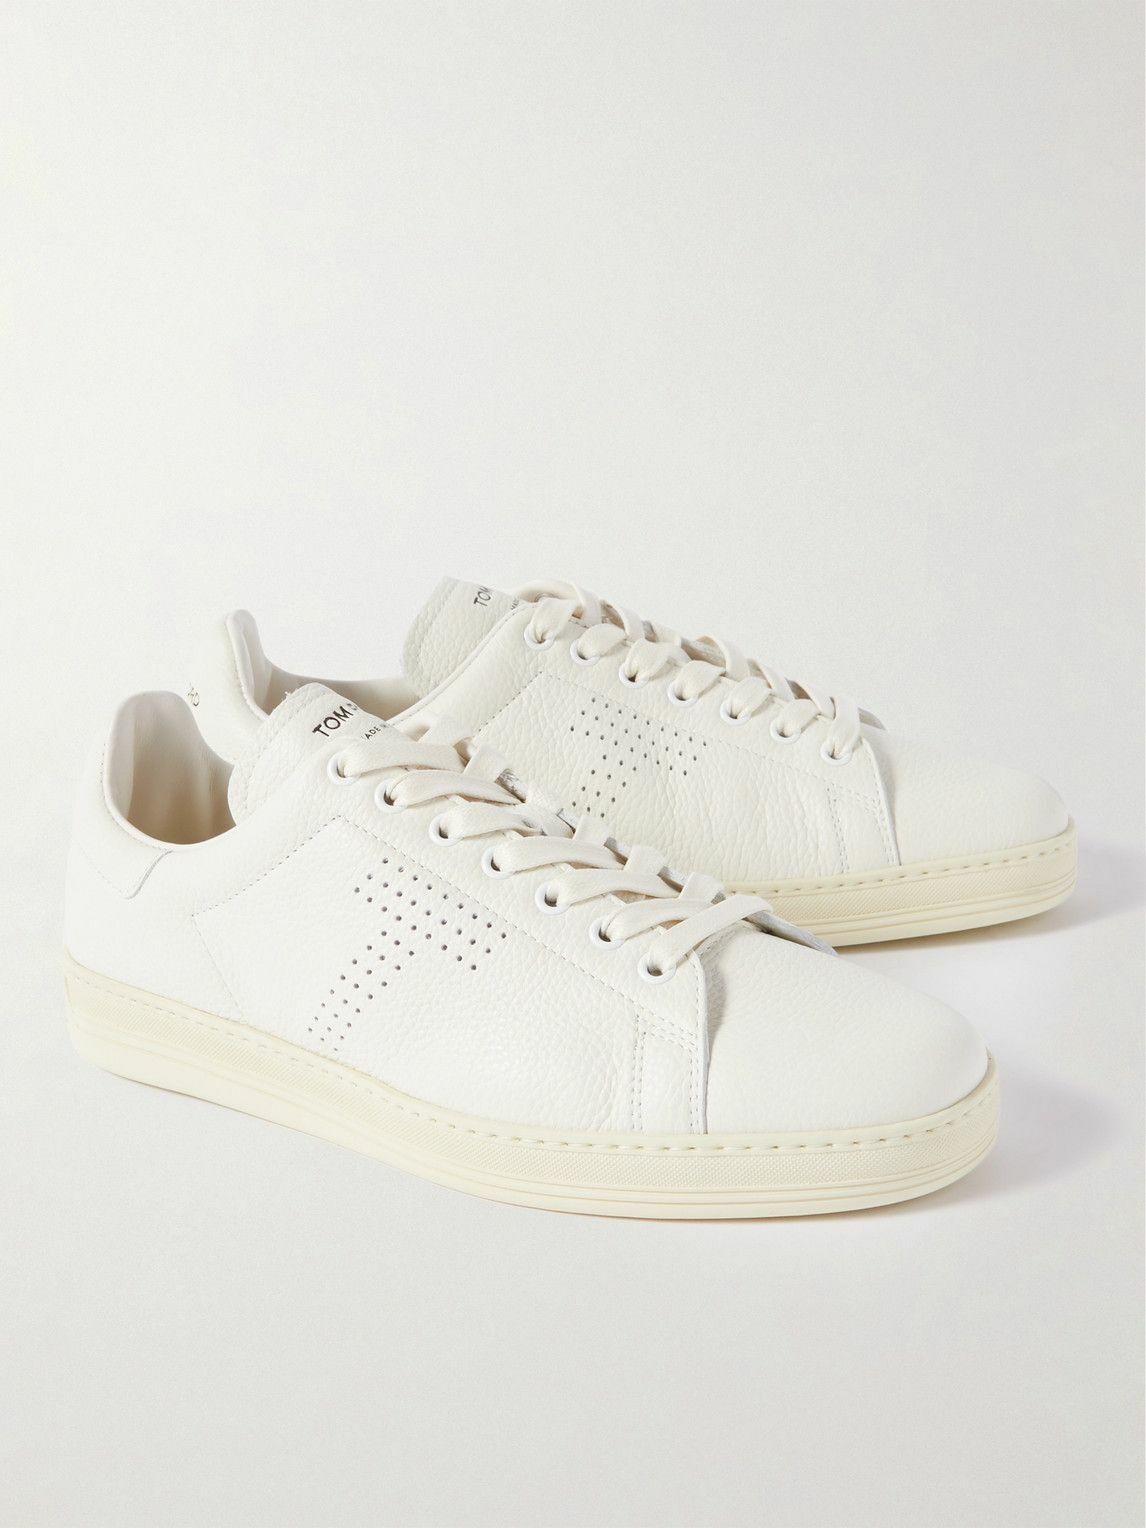 TOM FORD - Warwick Perforated Full-Grain Leather Sneakers - White TOM FORD